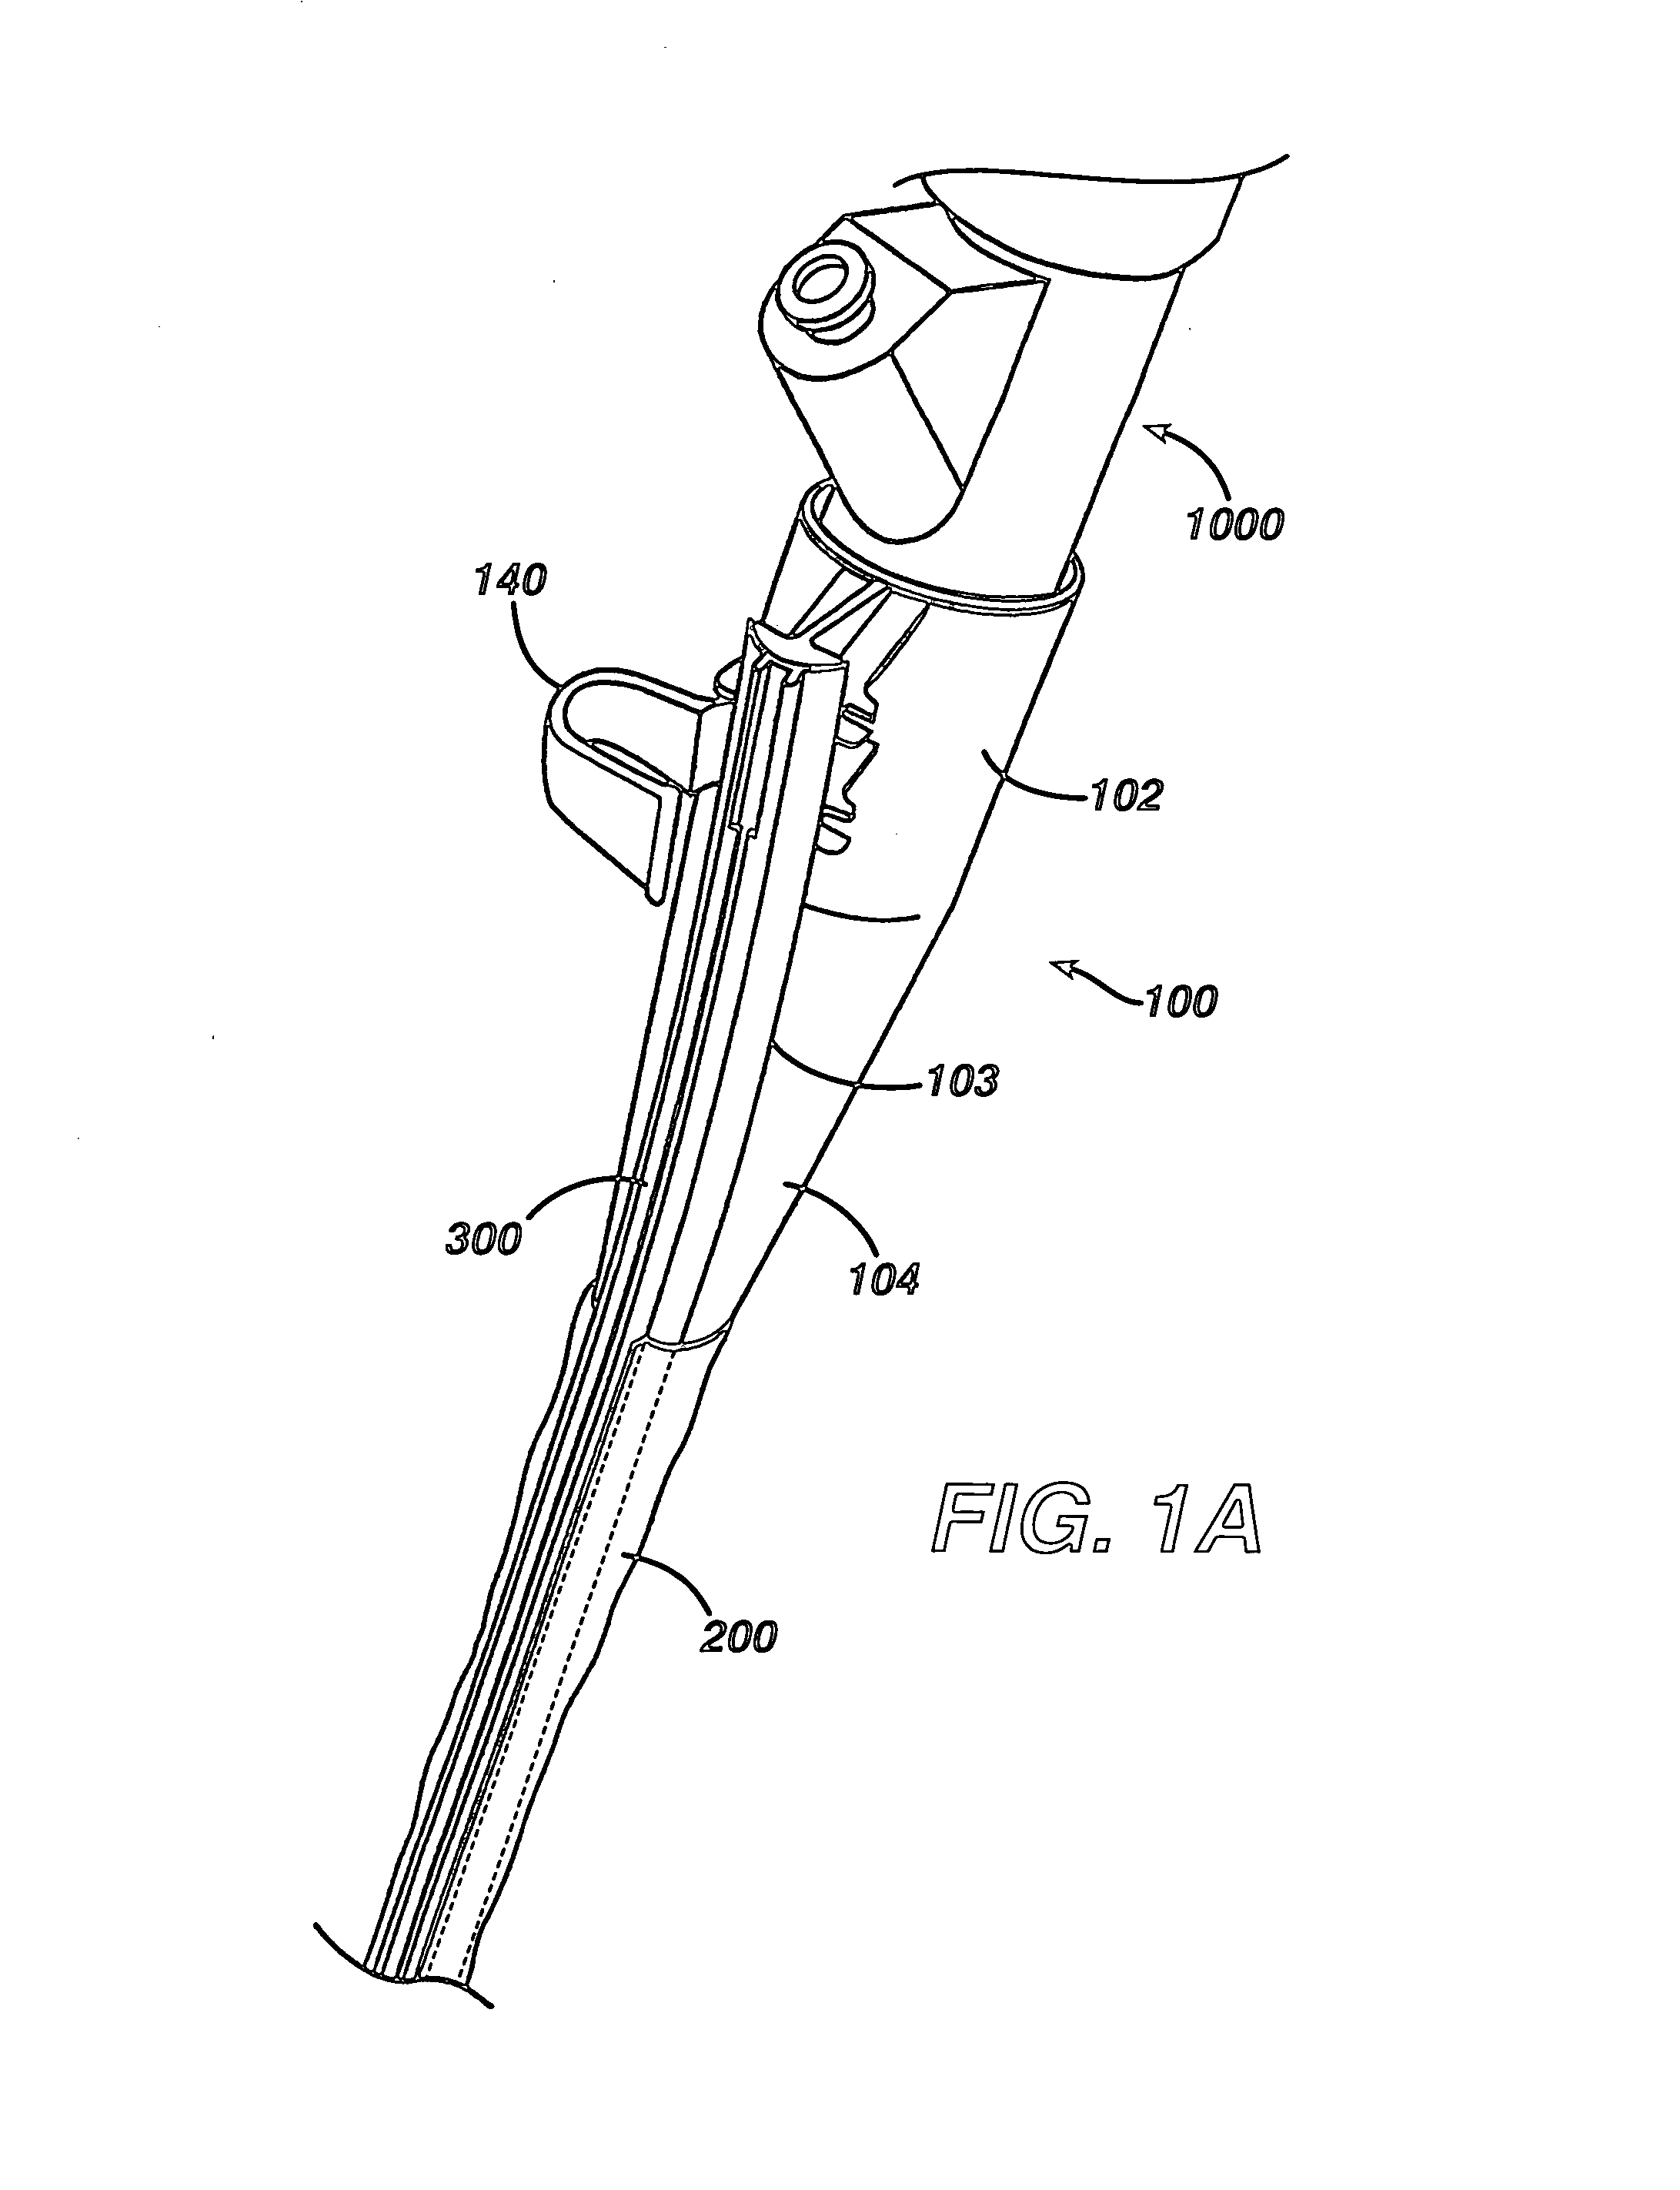 Sheath for use with an endoscope